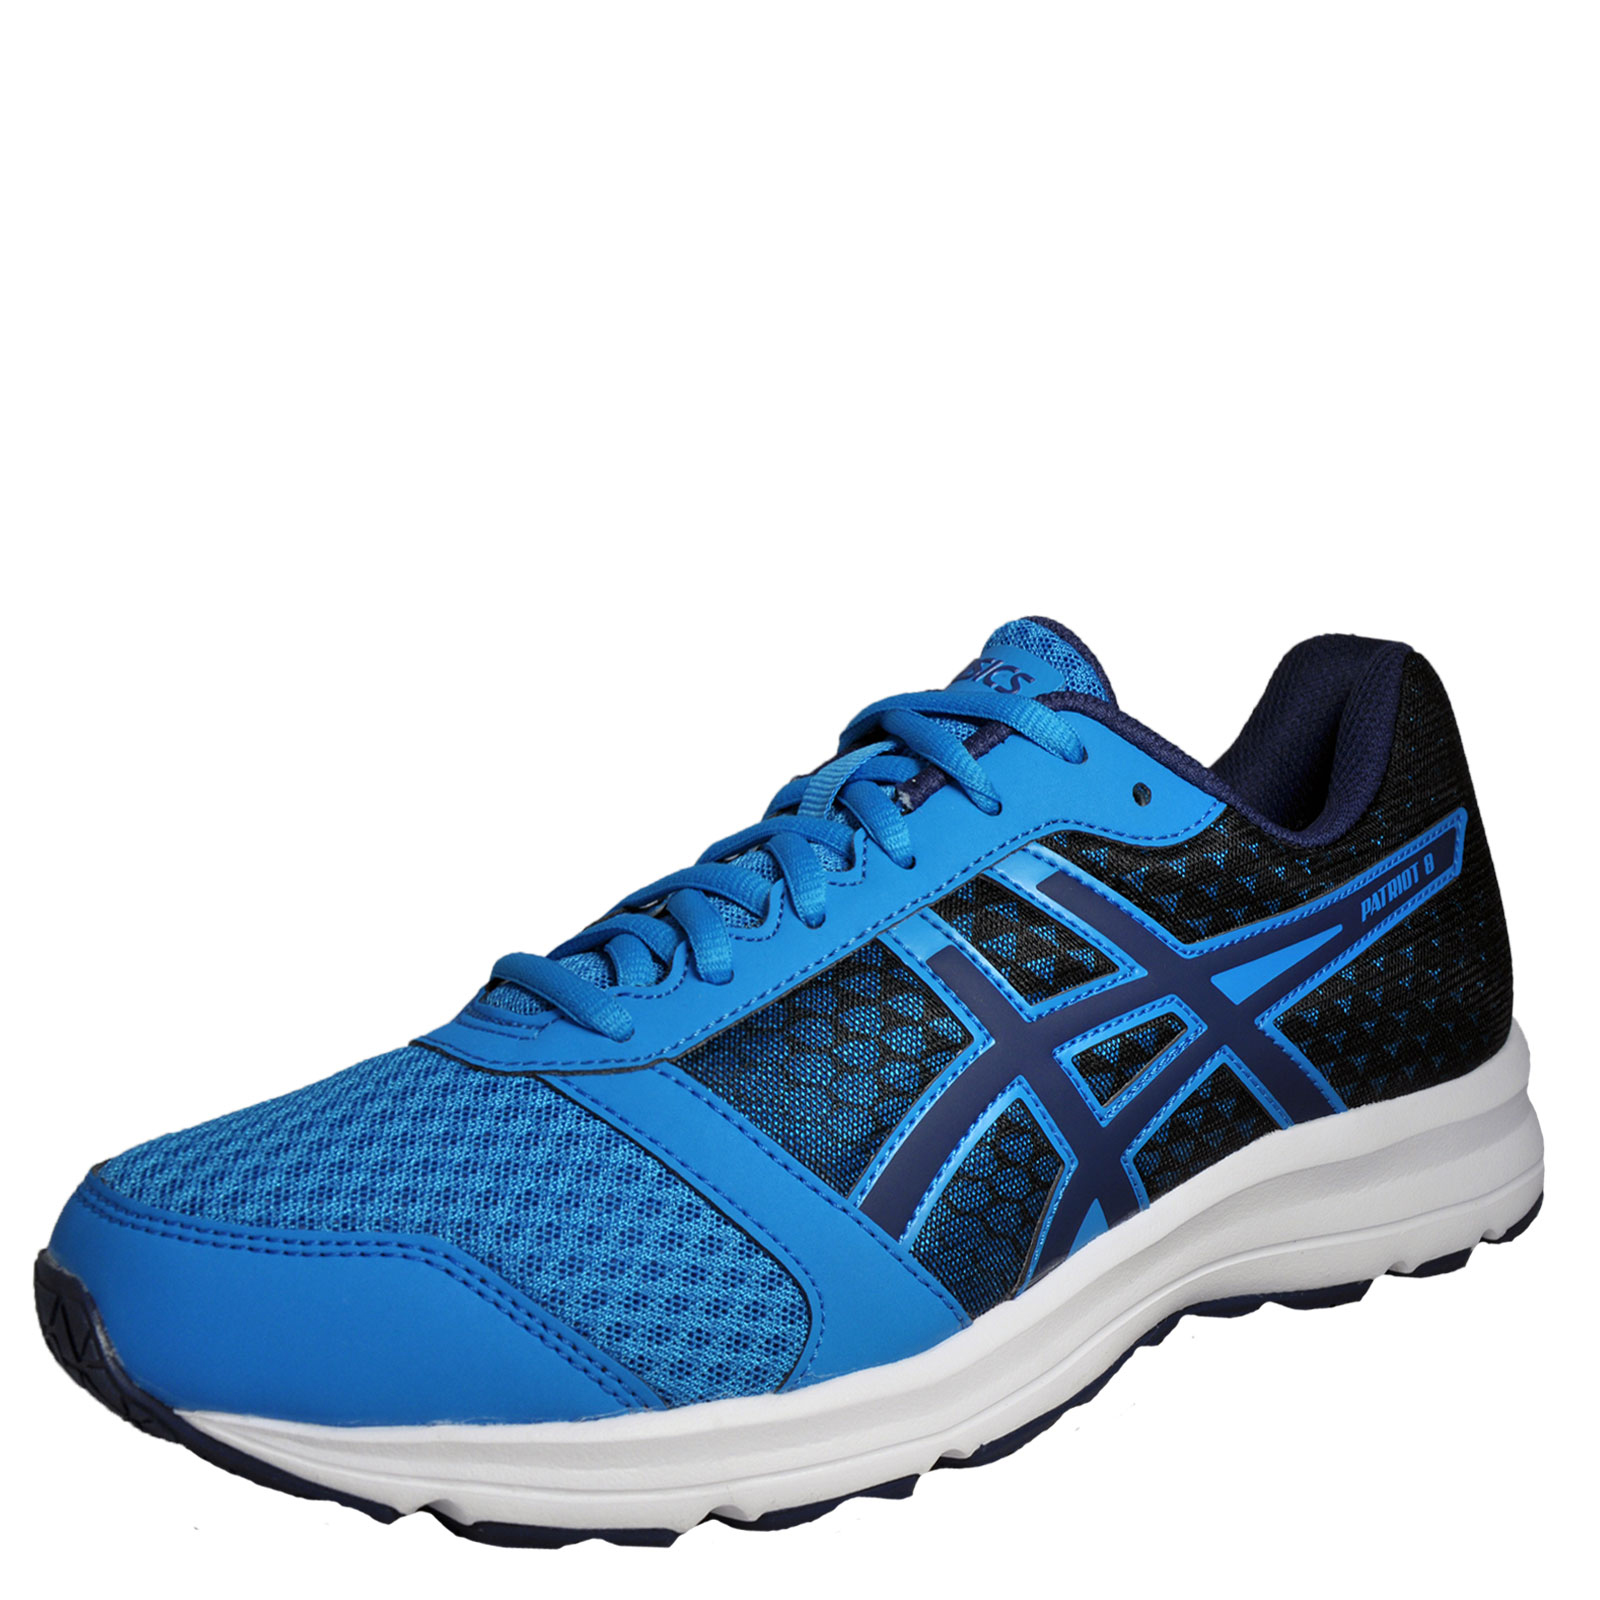 Asics Patriot 8 Mens Running Shoes Fitness Gym Trainers Imperial Blue